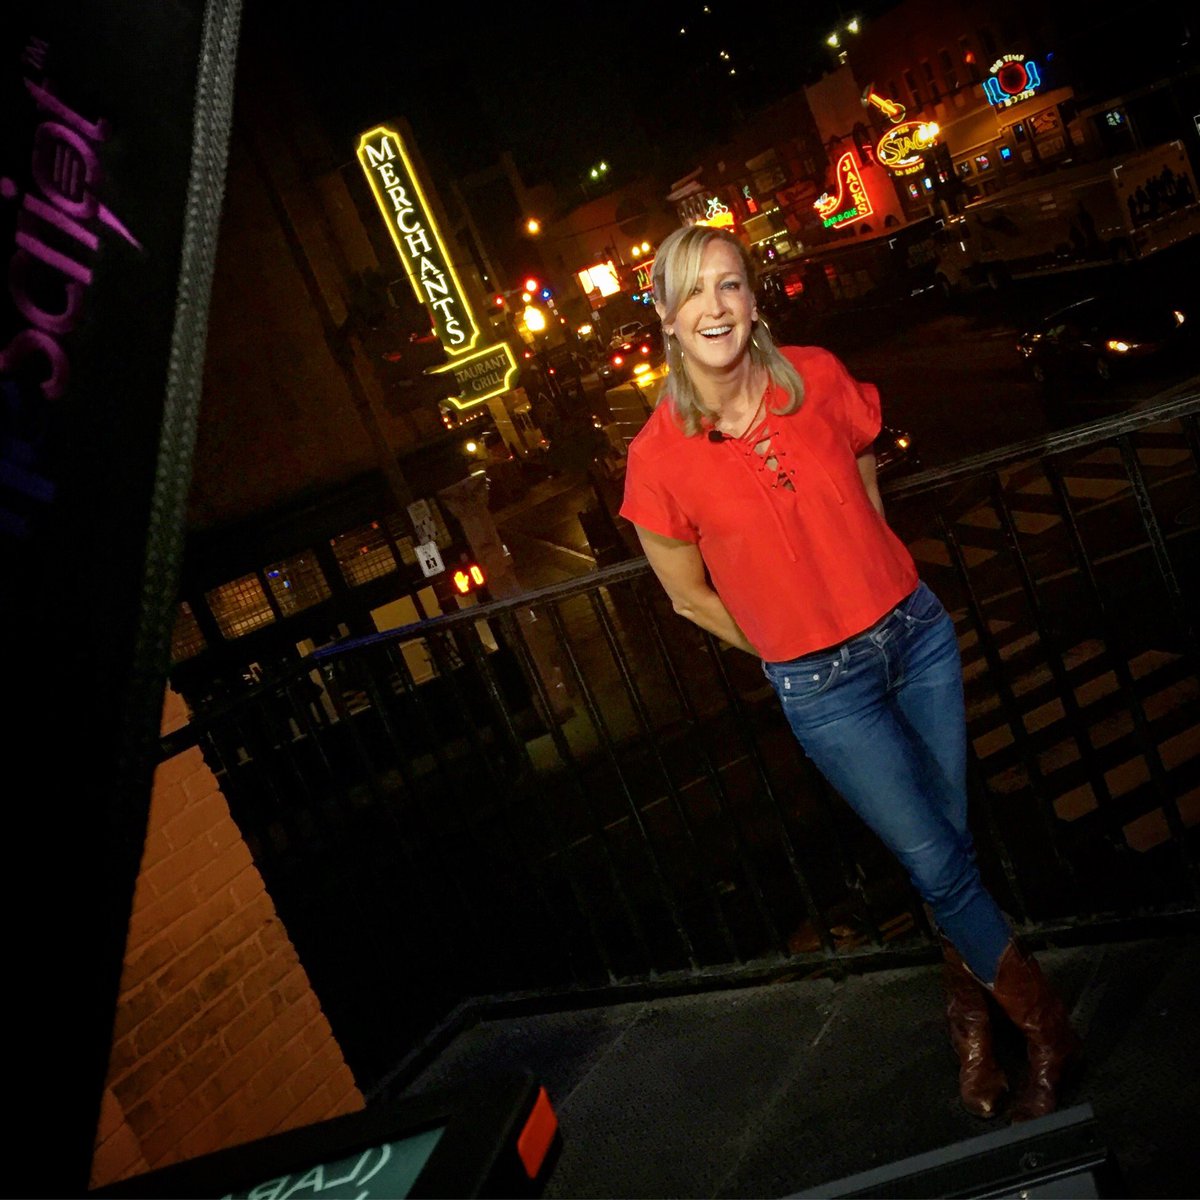 I'm LIVE from Downtown Nashville with everything you need to know from last night's #CMAawards50! What an incredible night!